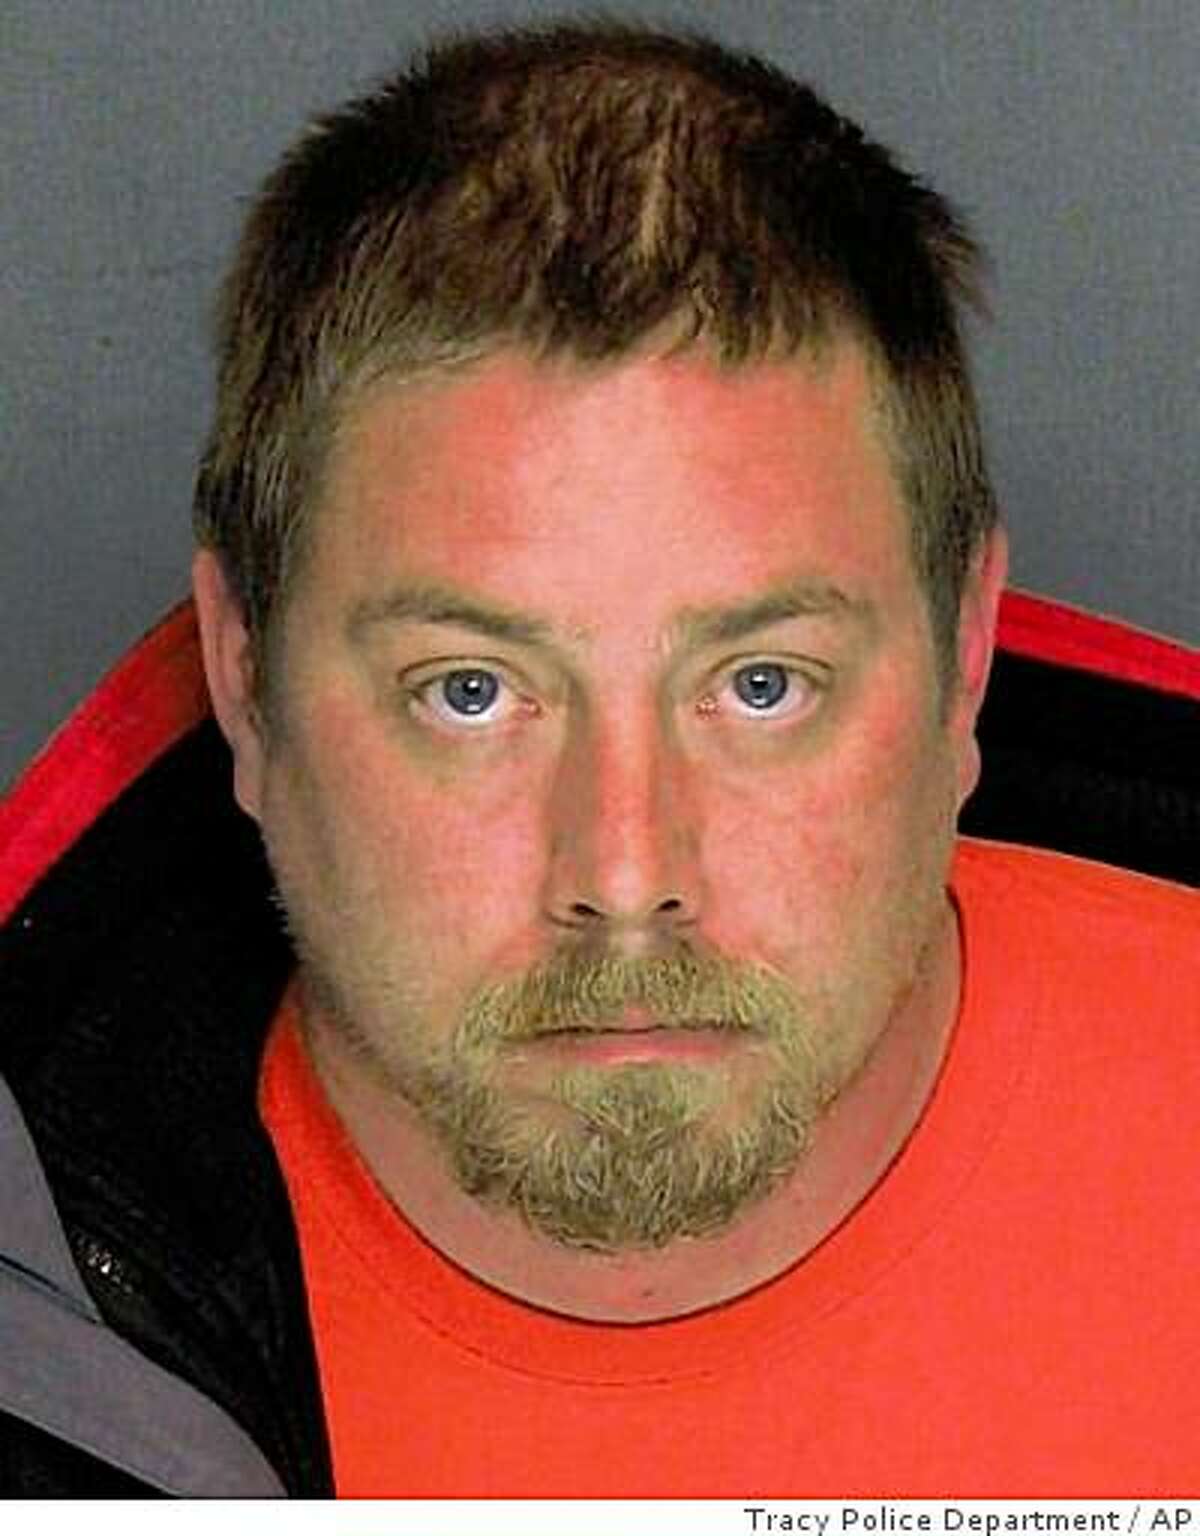 In this handout photo provided by the Tracy Police Department, the booking mug for Michael Schumacher, 34, is shown. Schumacher, and wife Kelly Layne Lau, 30, were arrested late Monday, charged with torture and other counts after a bruised, terrified 17-year-old showed up at a gym with a chain locked to his ankle, claiming he had just fled his captors, authorities said Tuesday. (AP Photo/Tracy Police Department)